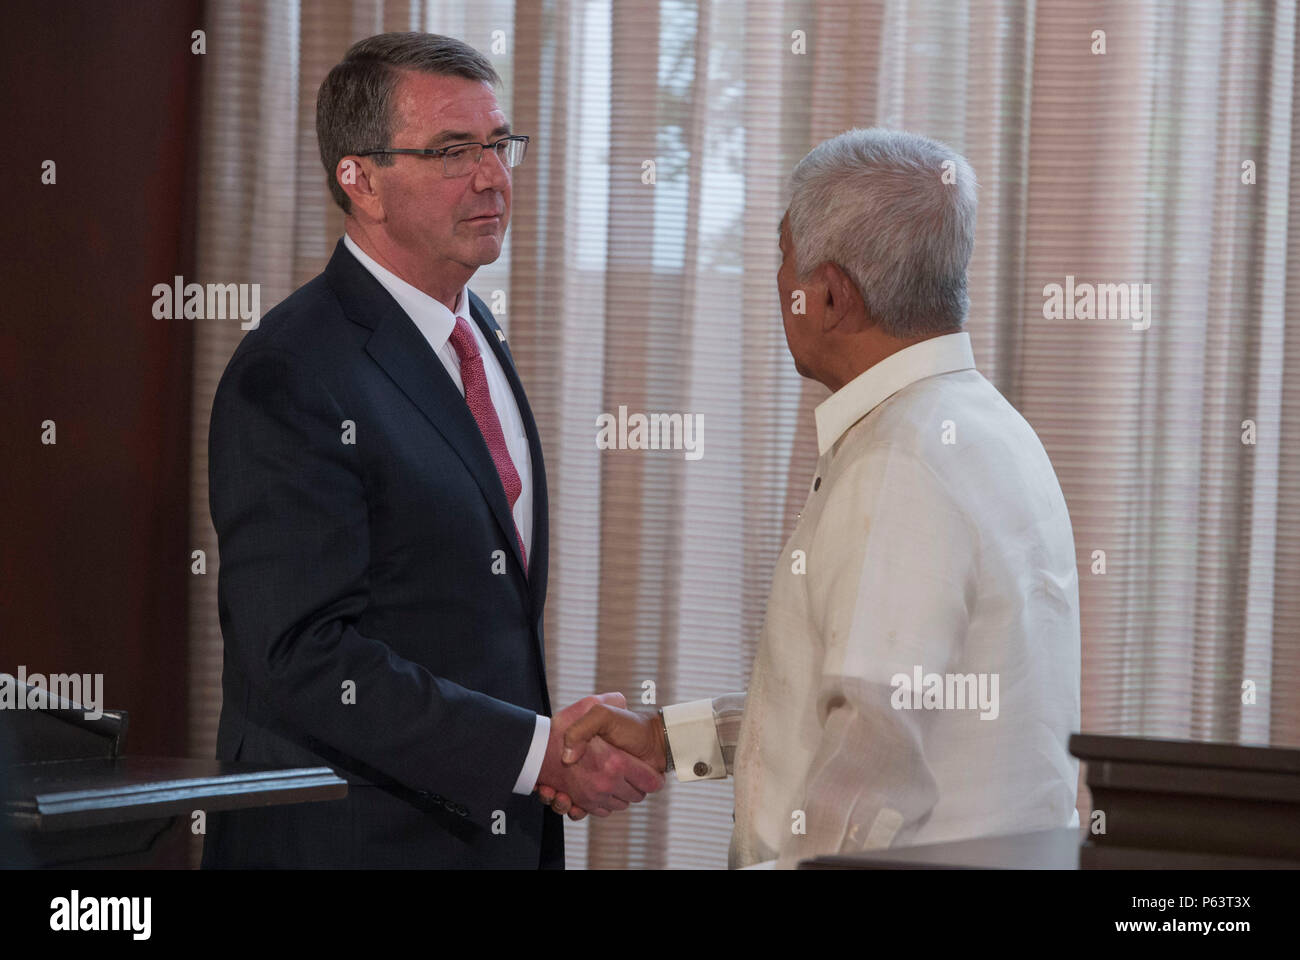 Secretary of Defense Ash Carter and Philippine Secretary of National Defense Voltaire Gazmin shake hands at the conclusion of a joint press conference at the Malacanang Palace in Manila, Philippines April 14, 2016. Carter is visiting the Philippines to solidify the rebalance to the Asia-Pacific region.(Photo by Senior Master Sgt. Adrian Cadiz) Stock Photo